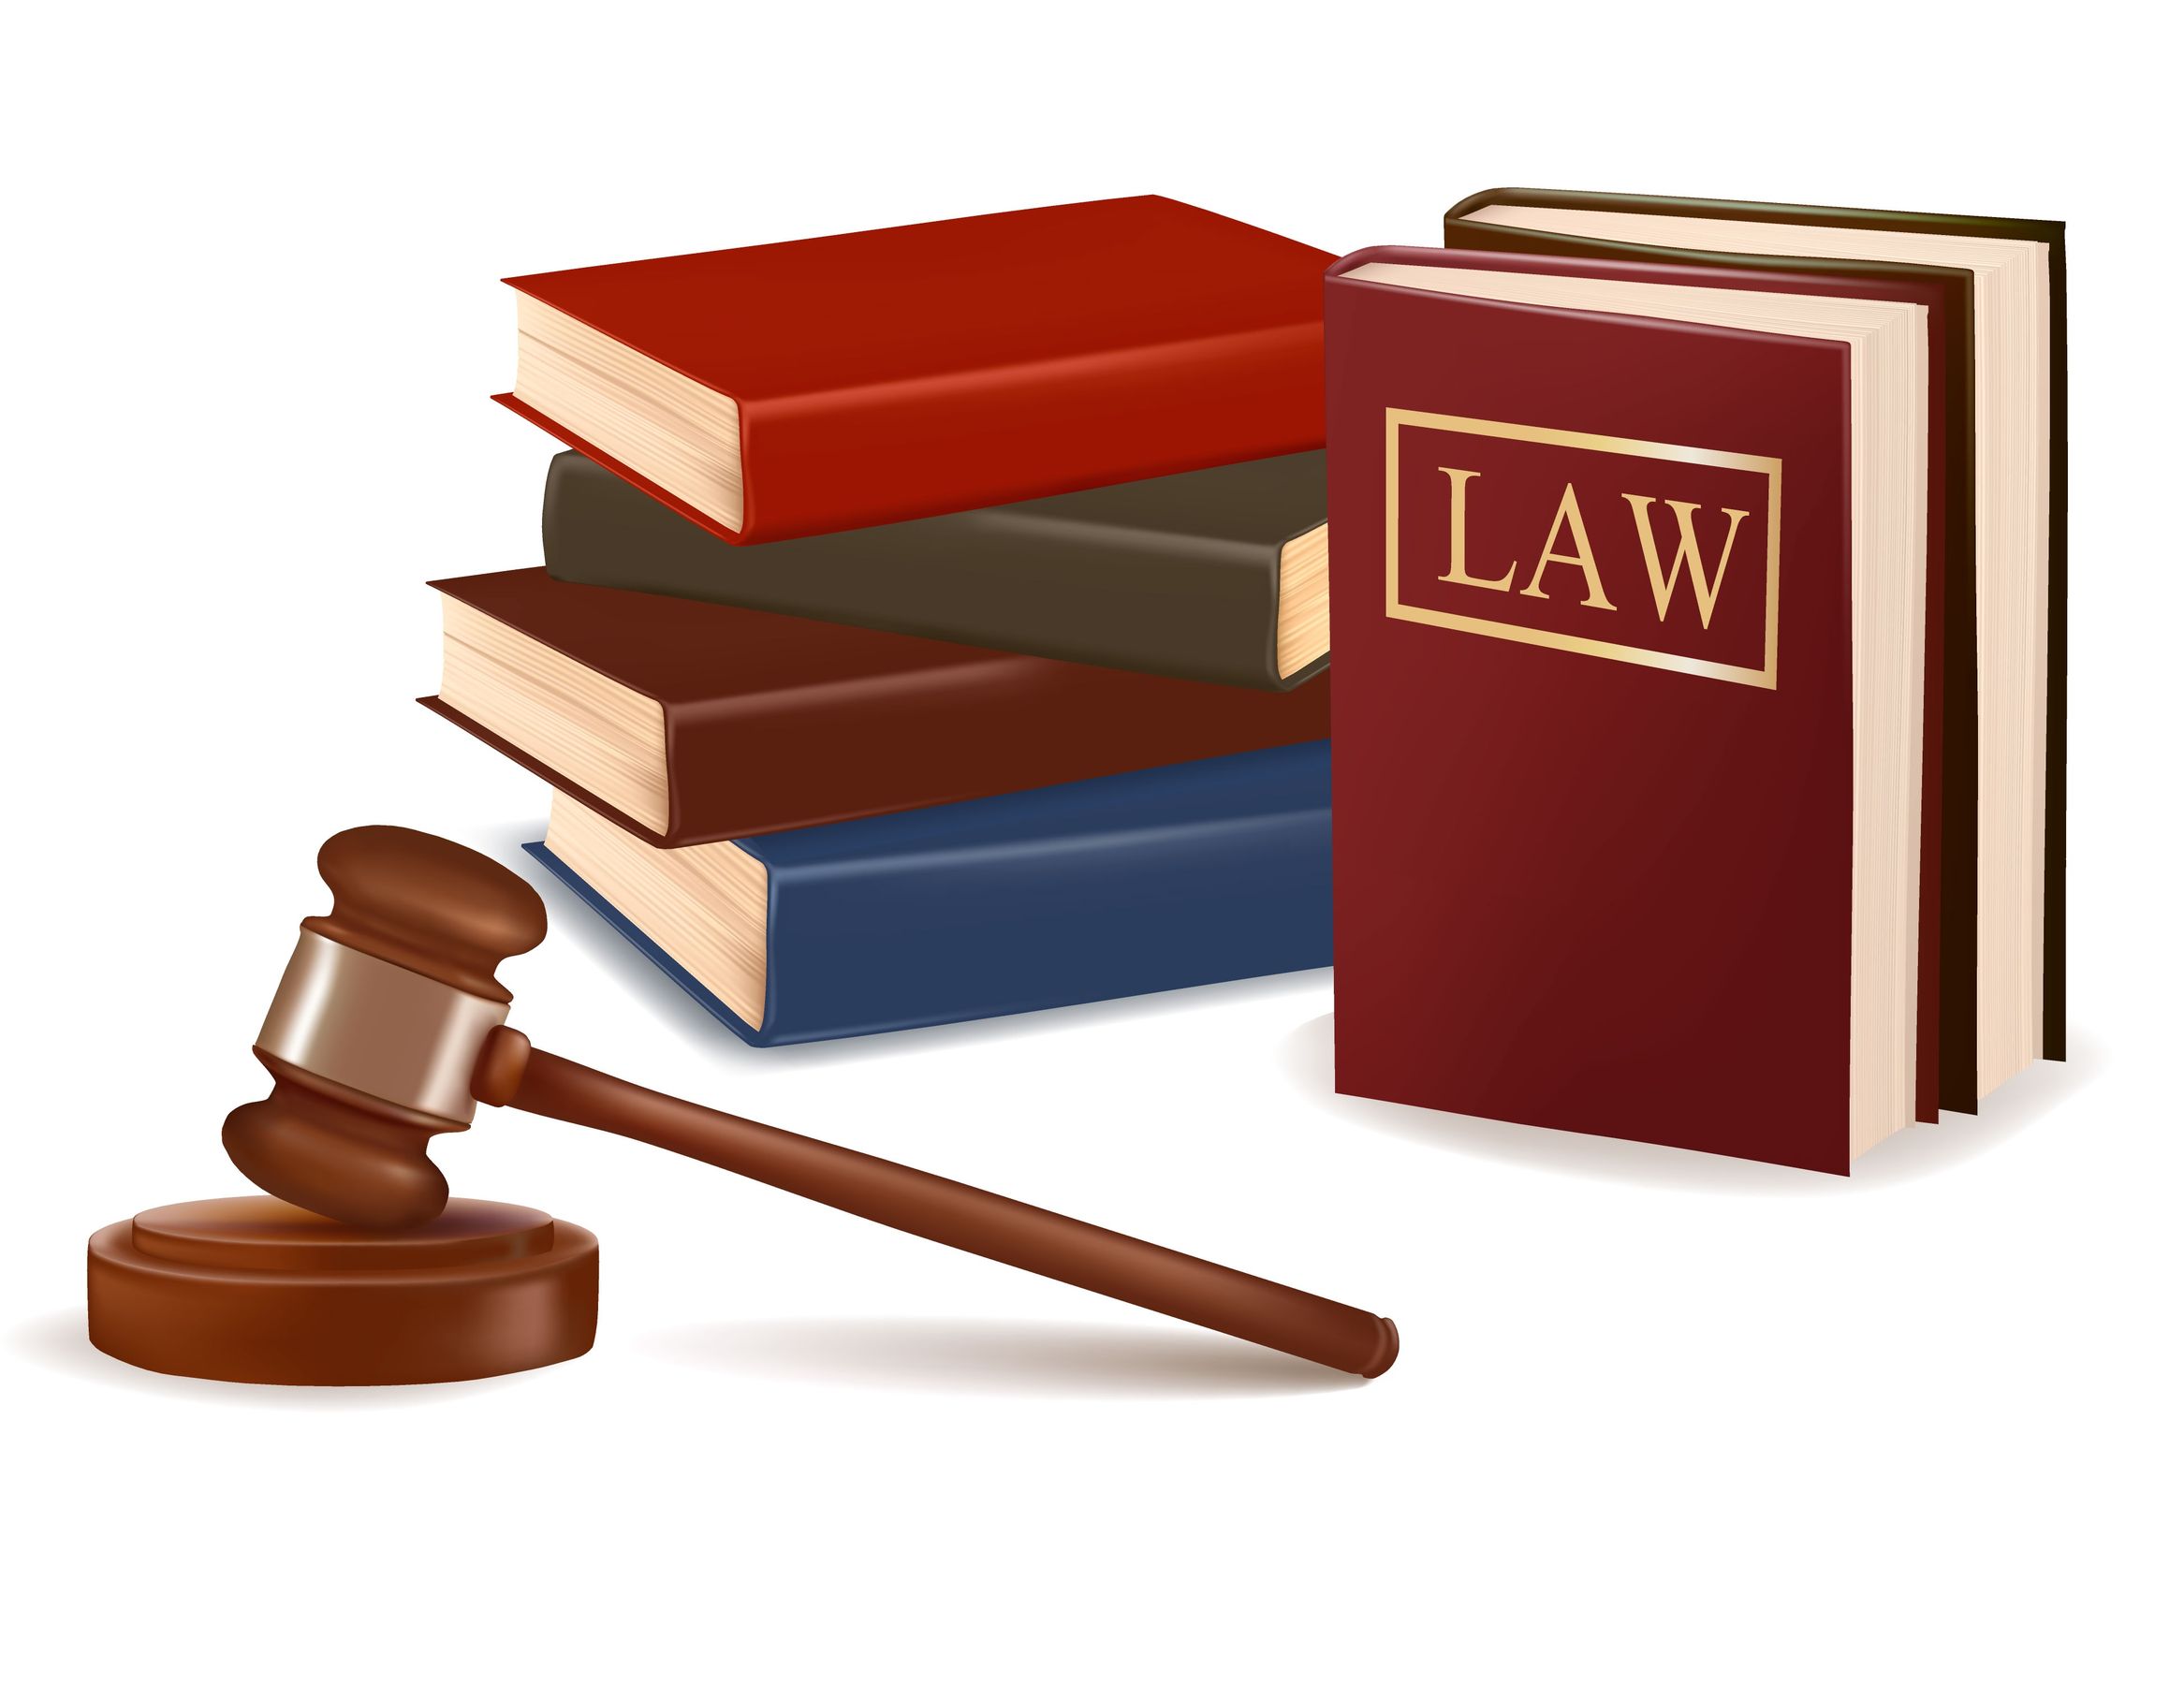 Free book cliparts download. Law clipart law regulation